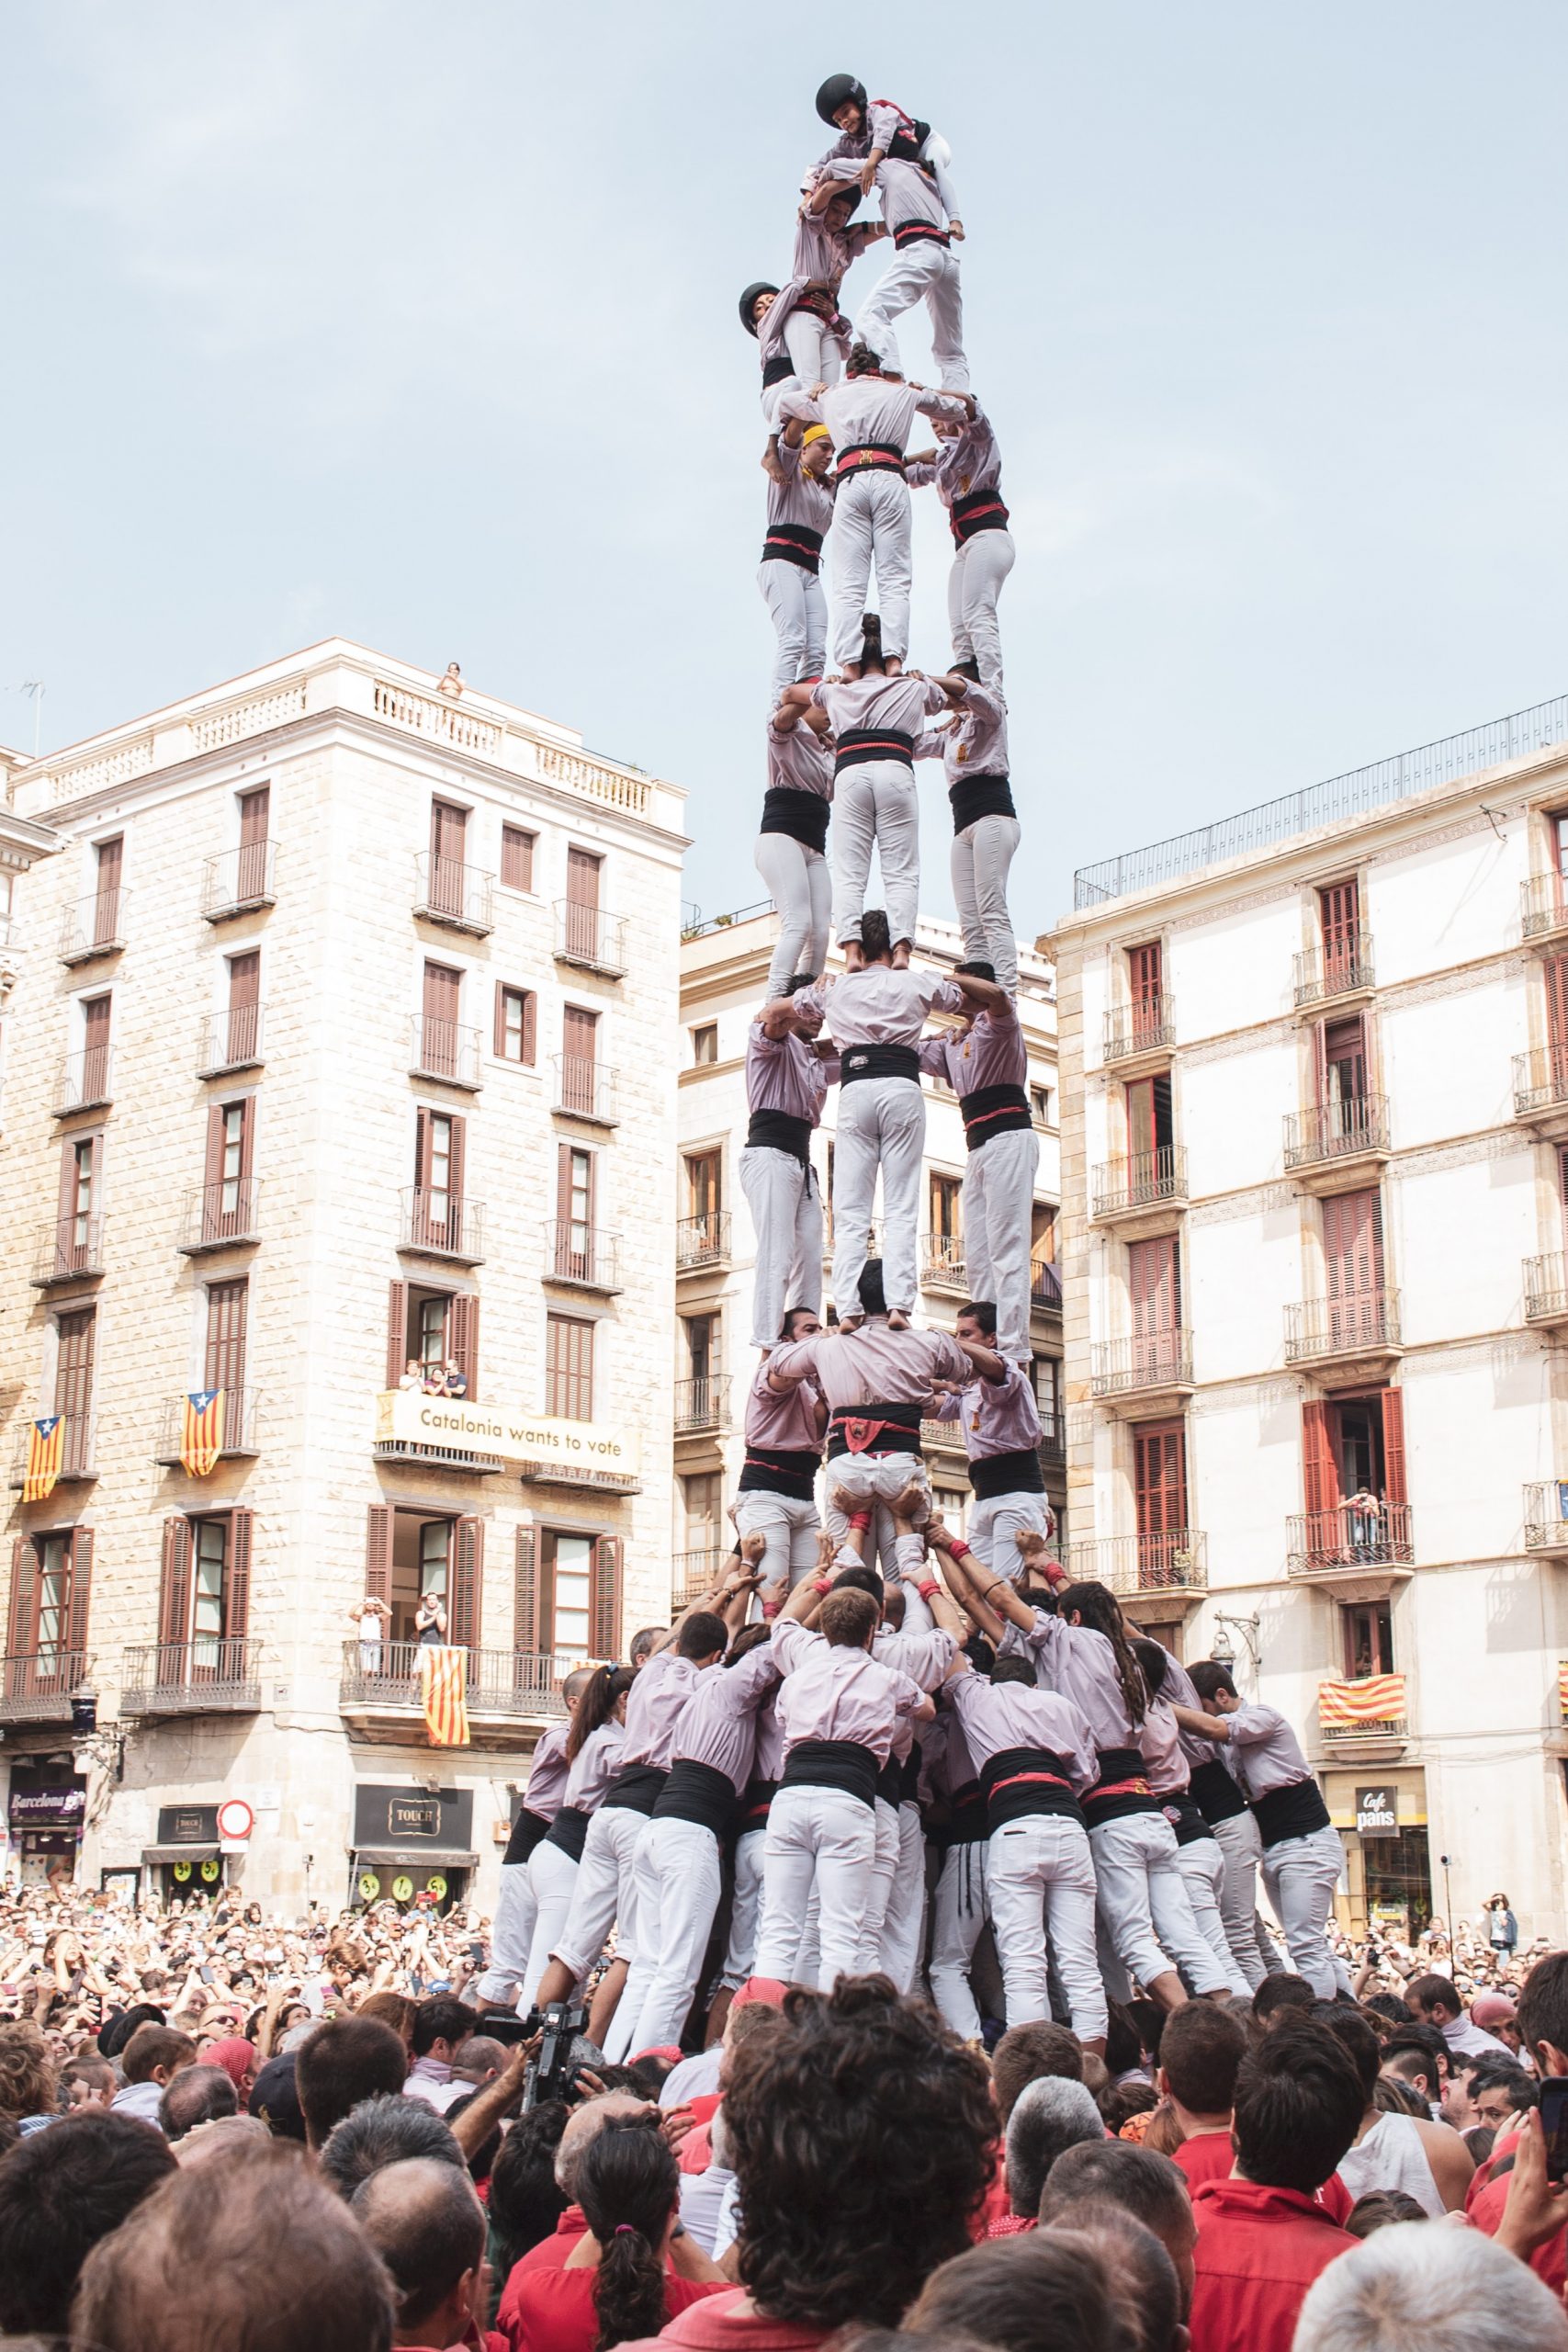 A human tower, named Castell, made during the Festival de la Mercè, the most important between the traditional celebrations in Barcelona